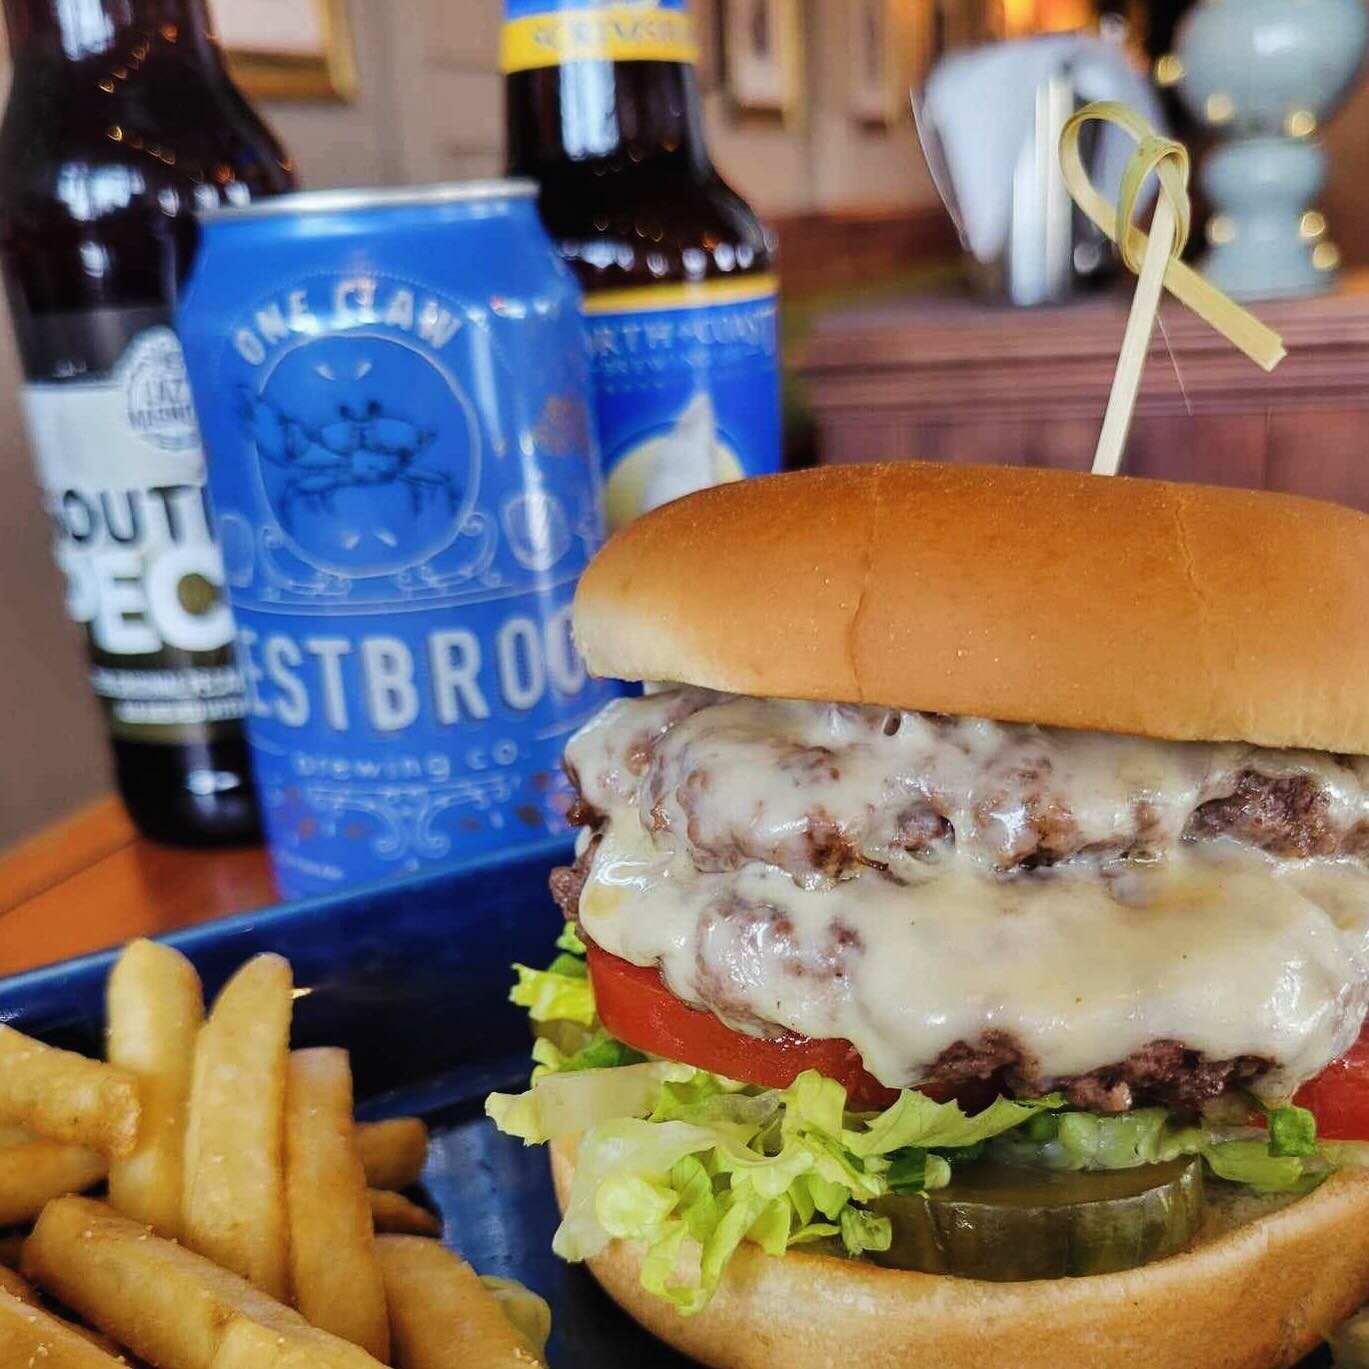 We are bringing the happy on this misty mountain day!  Come by for the best double in town!  Smash Burgers all day and 30% off beers! 
#smashburgers #brewsday #storiestreetgrille #blowingrock #828isgreat